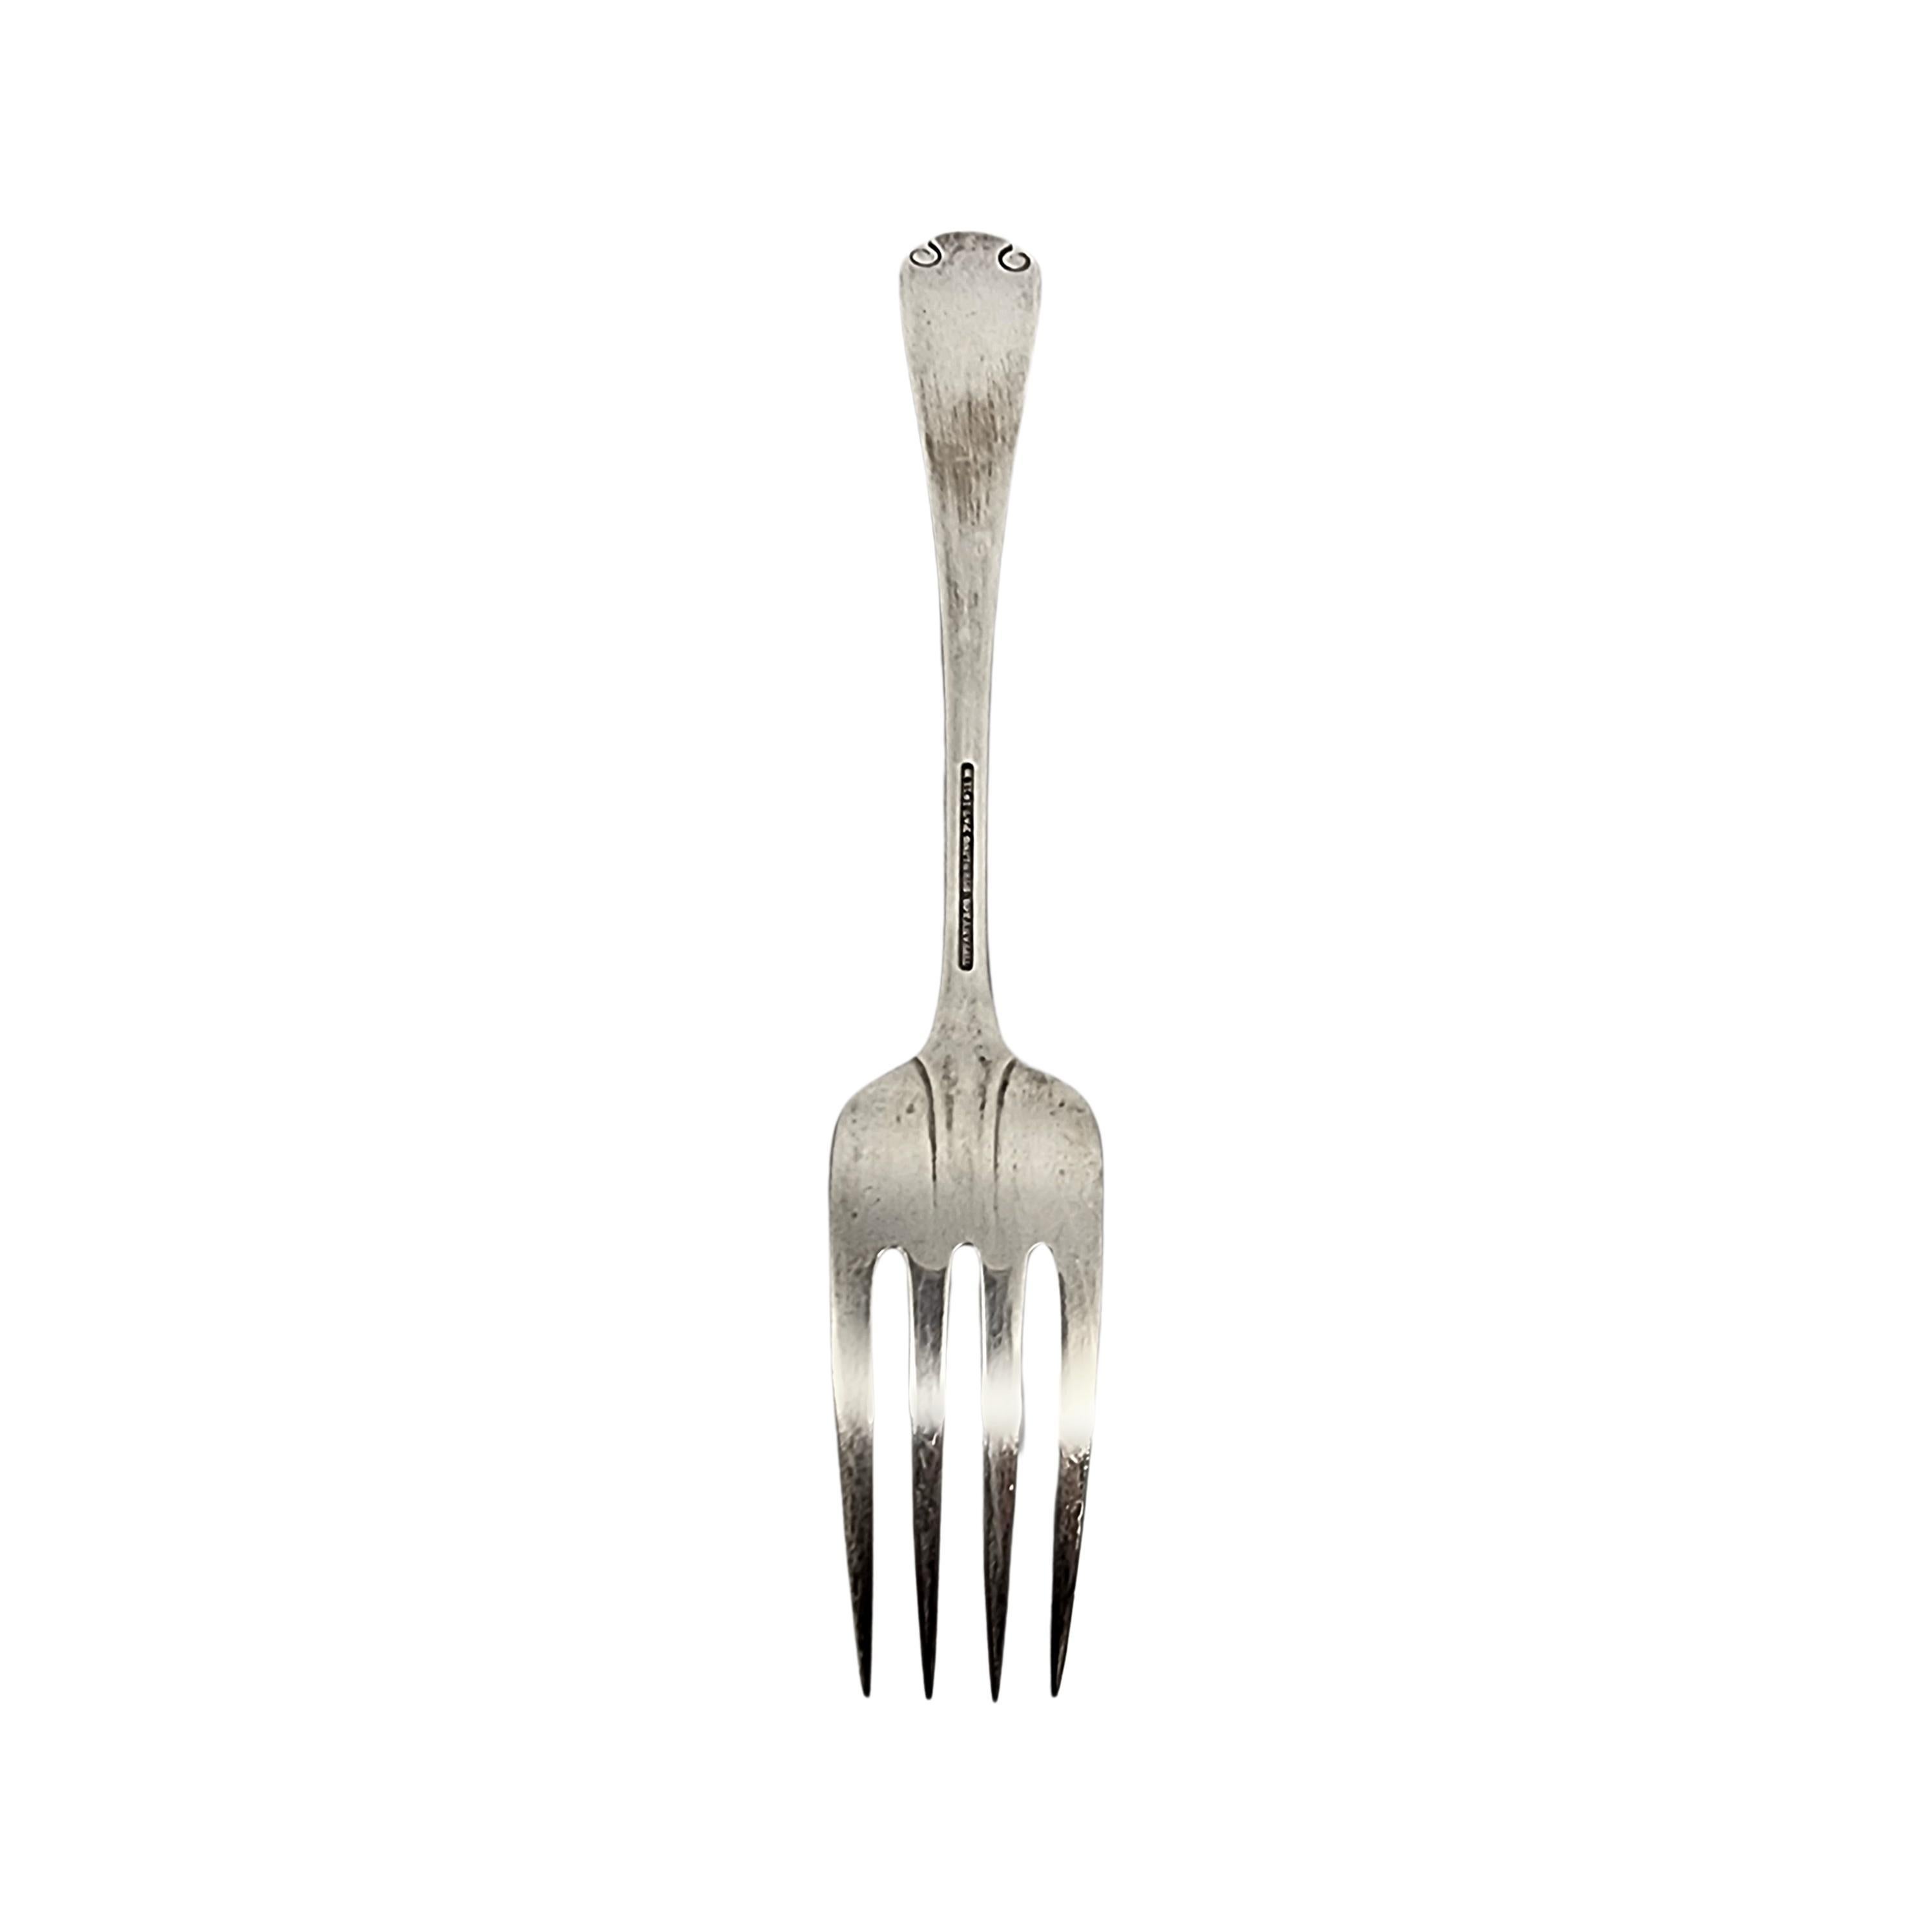 Sterling silver serving fork by Tiffany & Co in the Flemish pattern.

No monogram.

The Flemish pattern features a simple and elegant scroll design, making it a timeless classic that is still in demand today. Hallmarks date this piece to manufacture